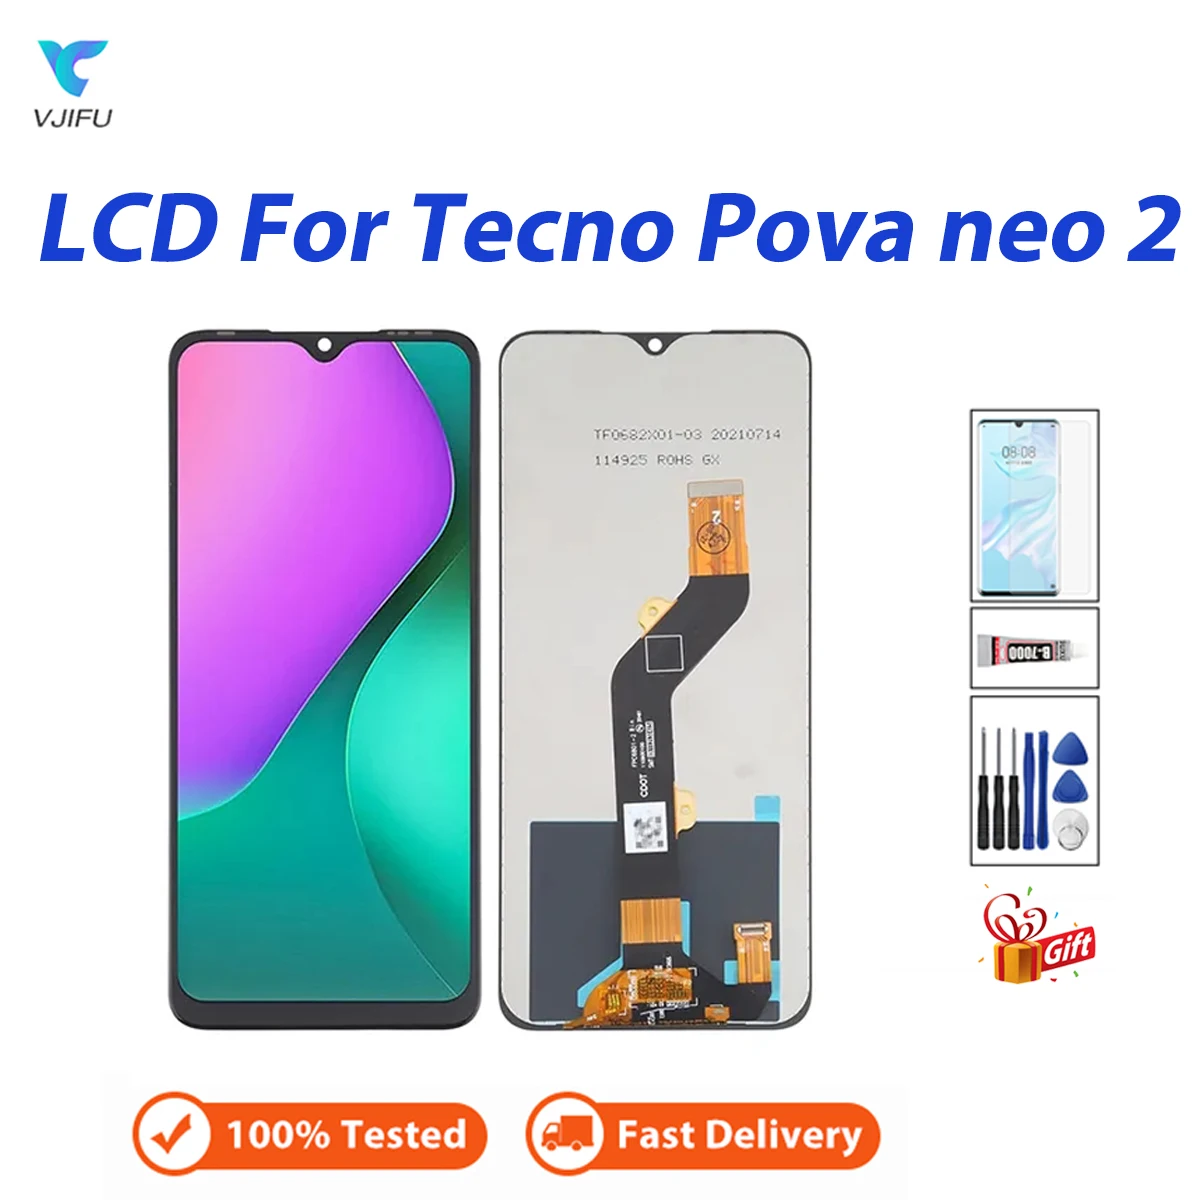 

LCD For Tecno Pova Neo 2 LG6n LCD Display Touch Screen Digitizer Assembly 6.82 inch Panel Replacement with Free Tools Glue